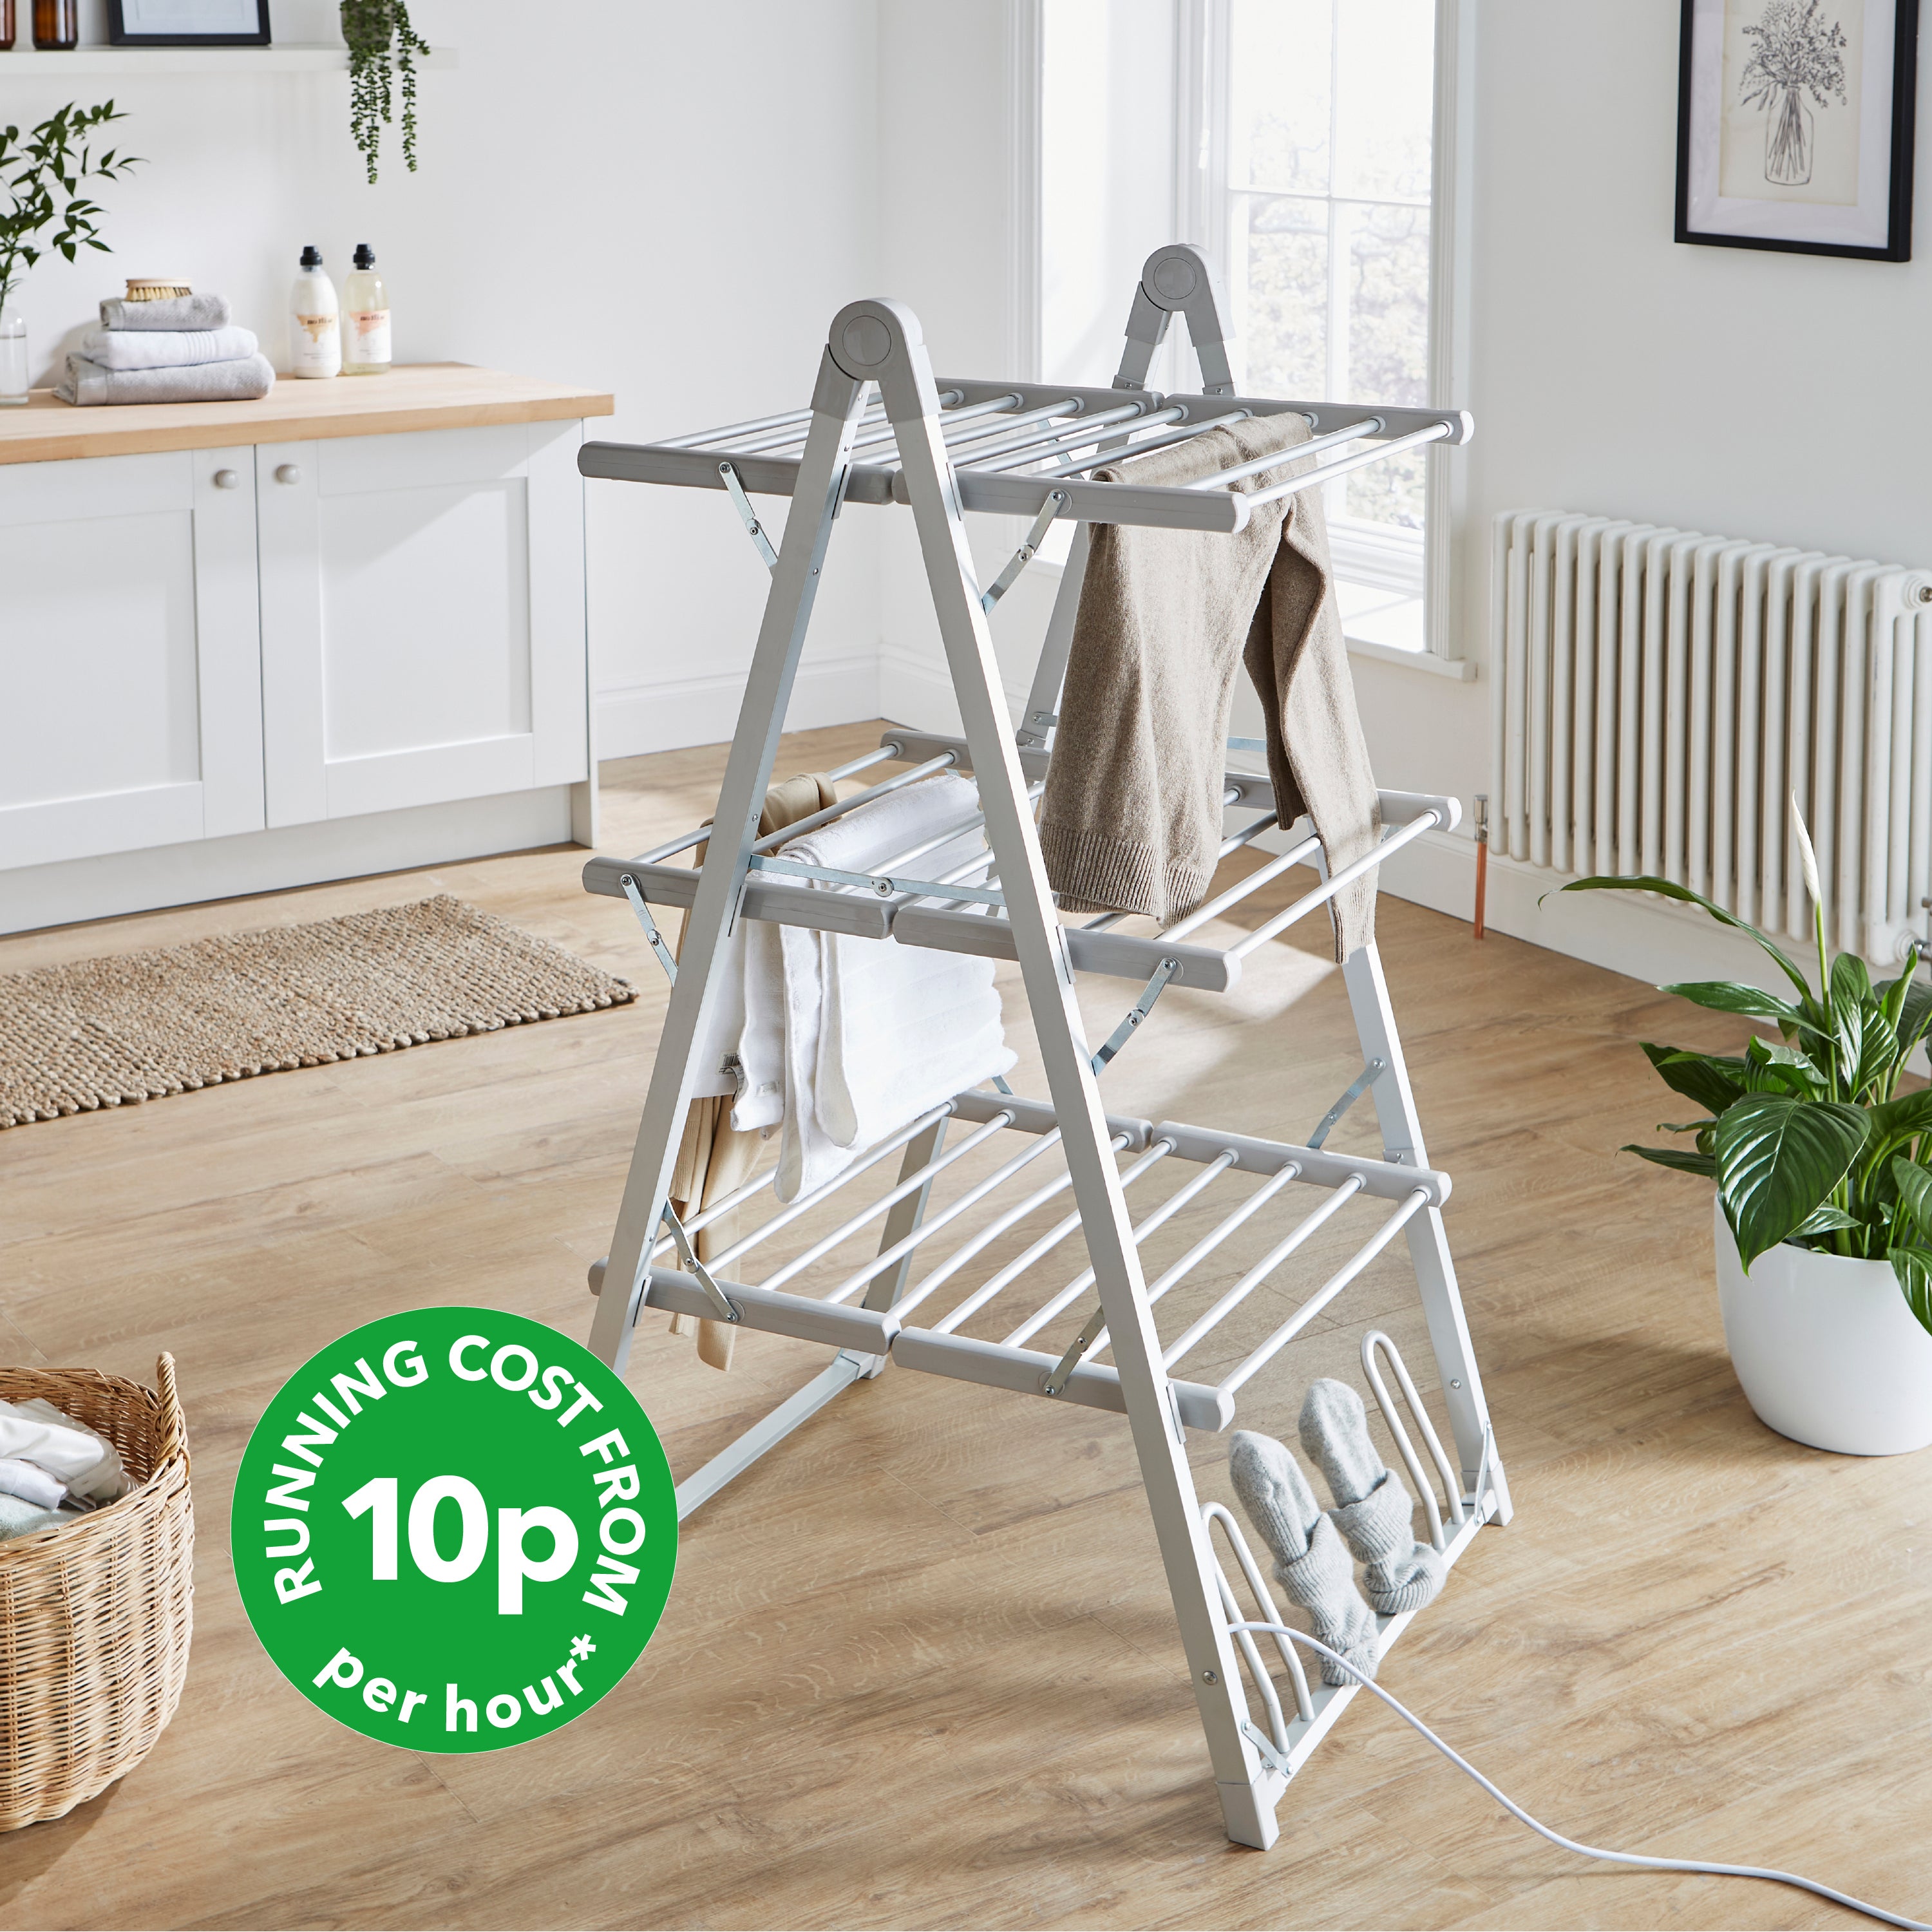 3 Tier Heated Airer